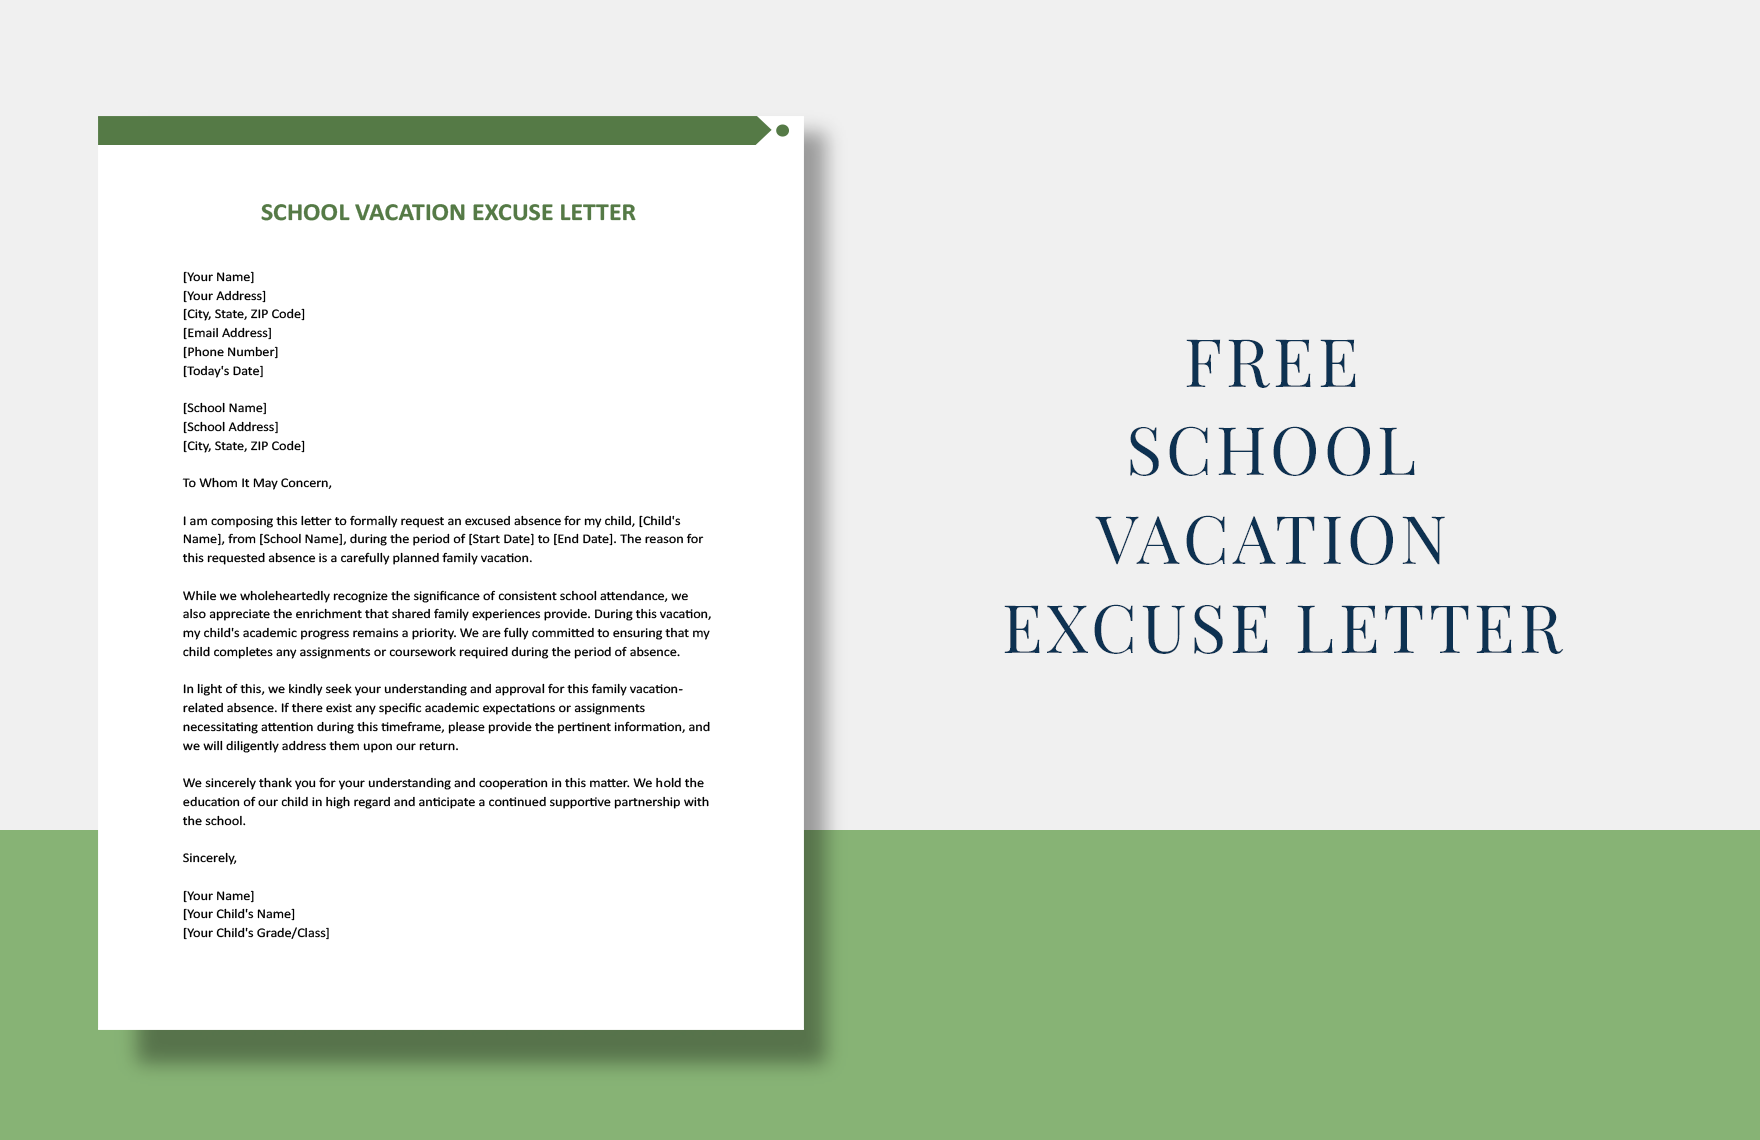 School Vacation Excuse Letter